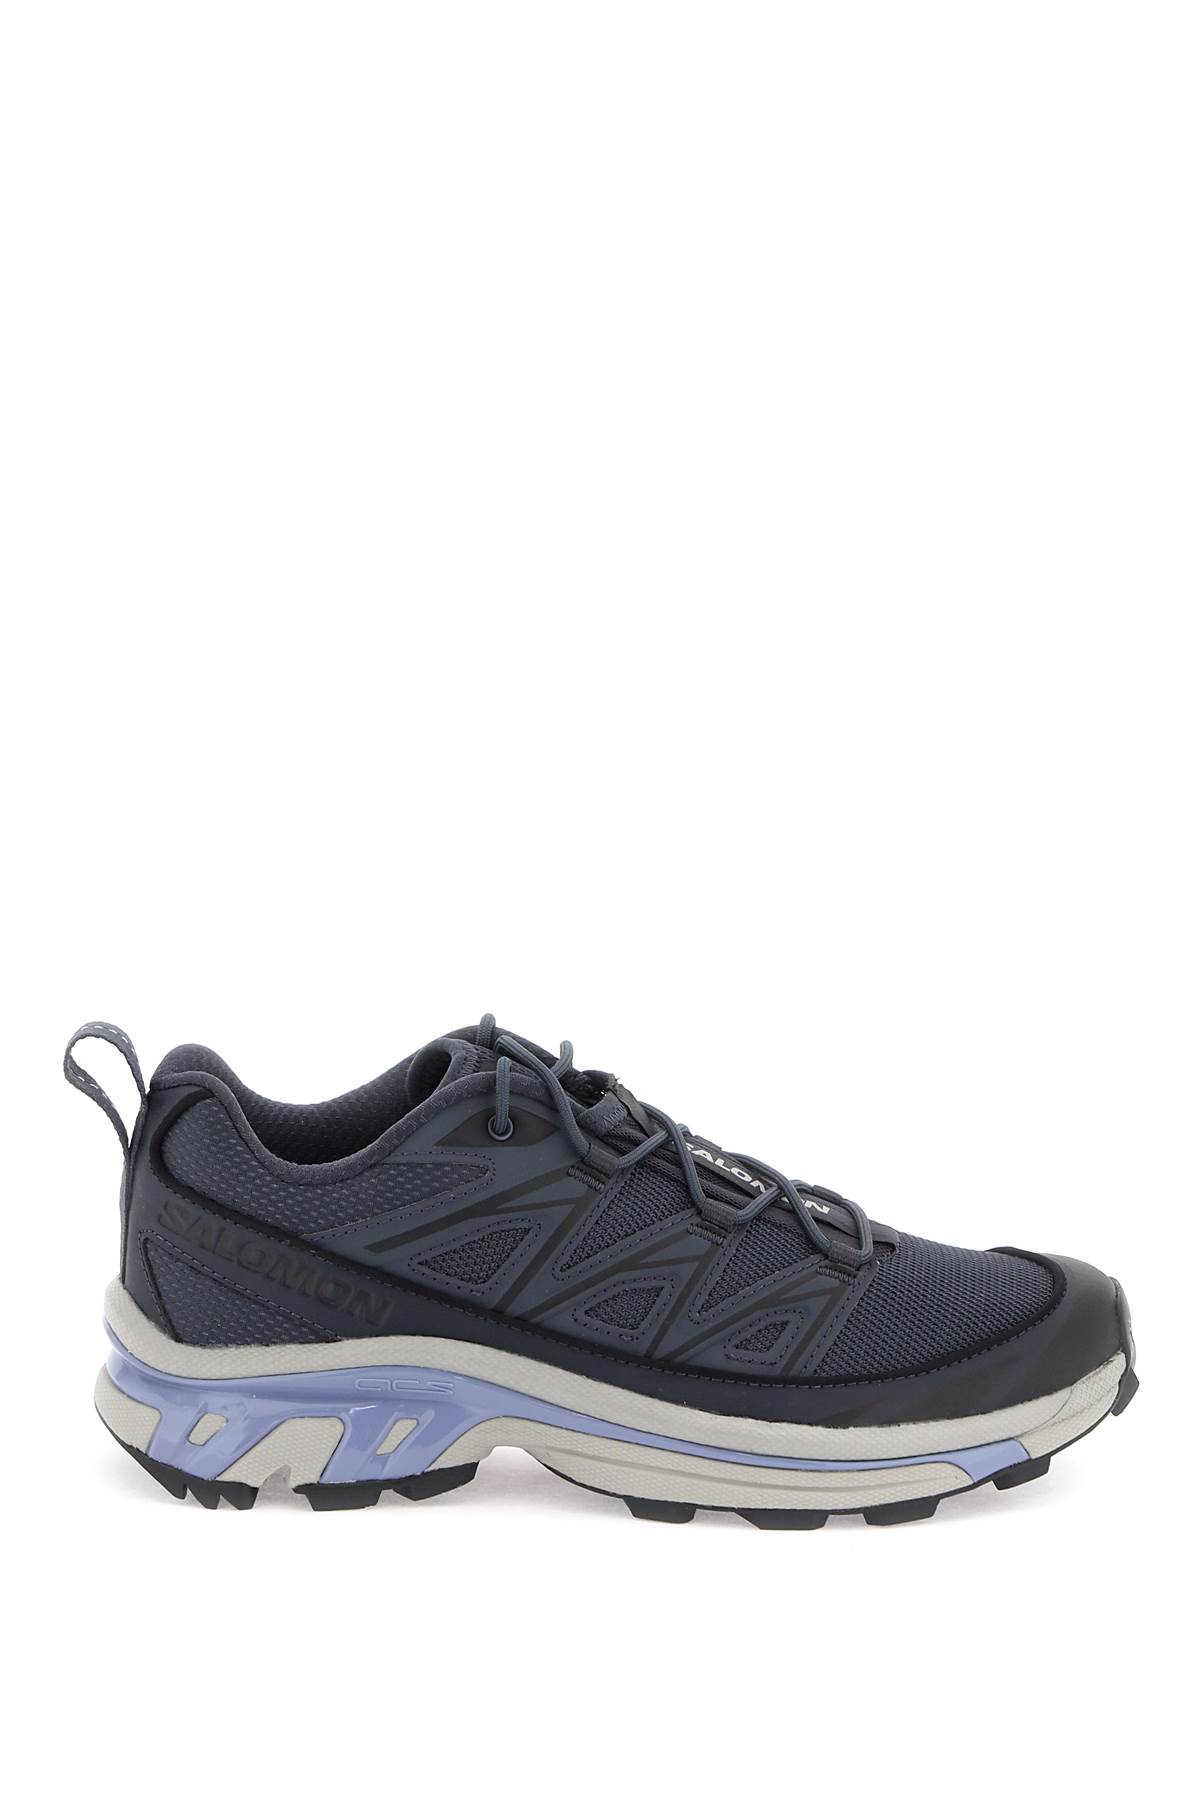 Shop Salomon Xt-6 Expanse Sneakers In India Ink Ghost Gray Stonewash (blue)